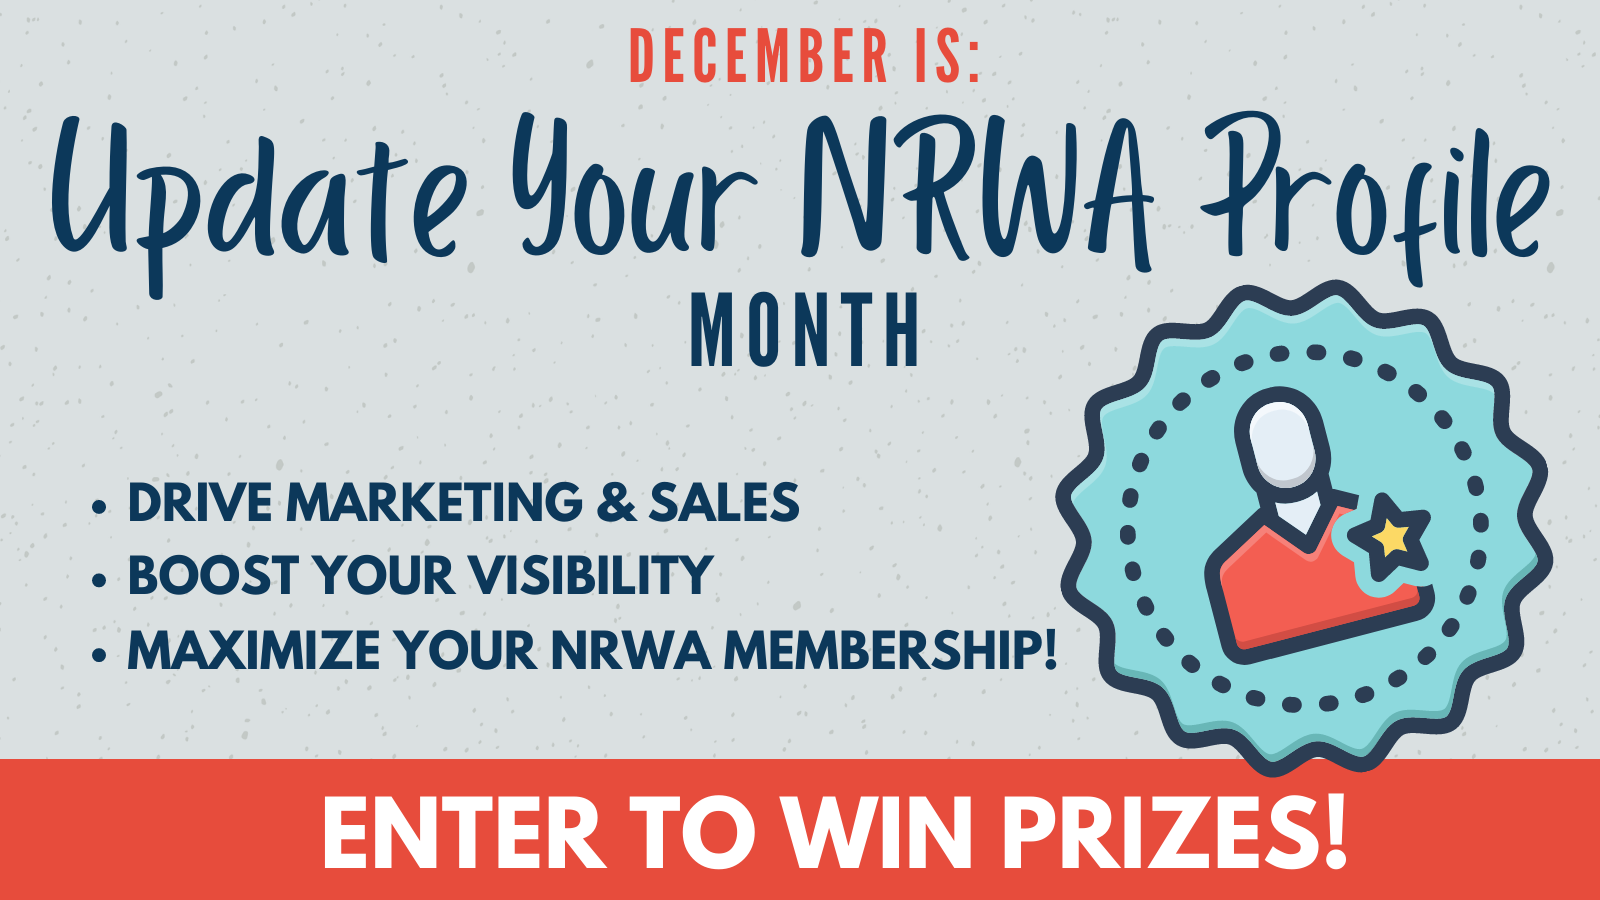 December is Update your NRWA Profile Month - Drive marketing & sales, boost your visibility, maximize your NRWA membership, enter to win prizes!